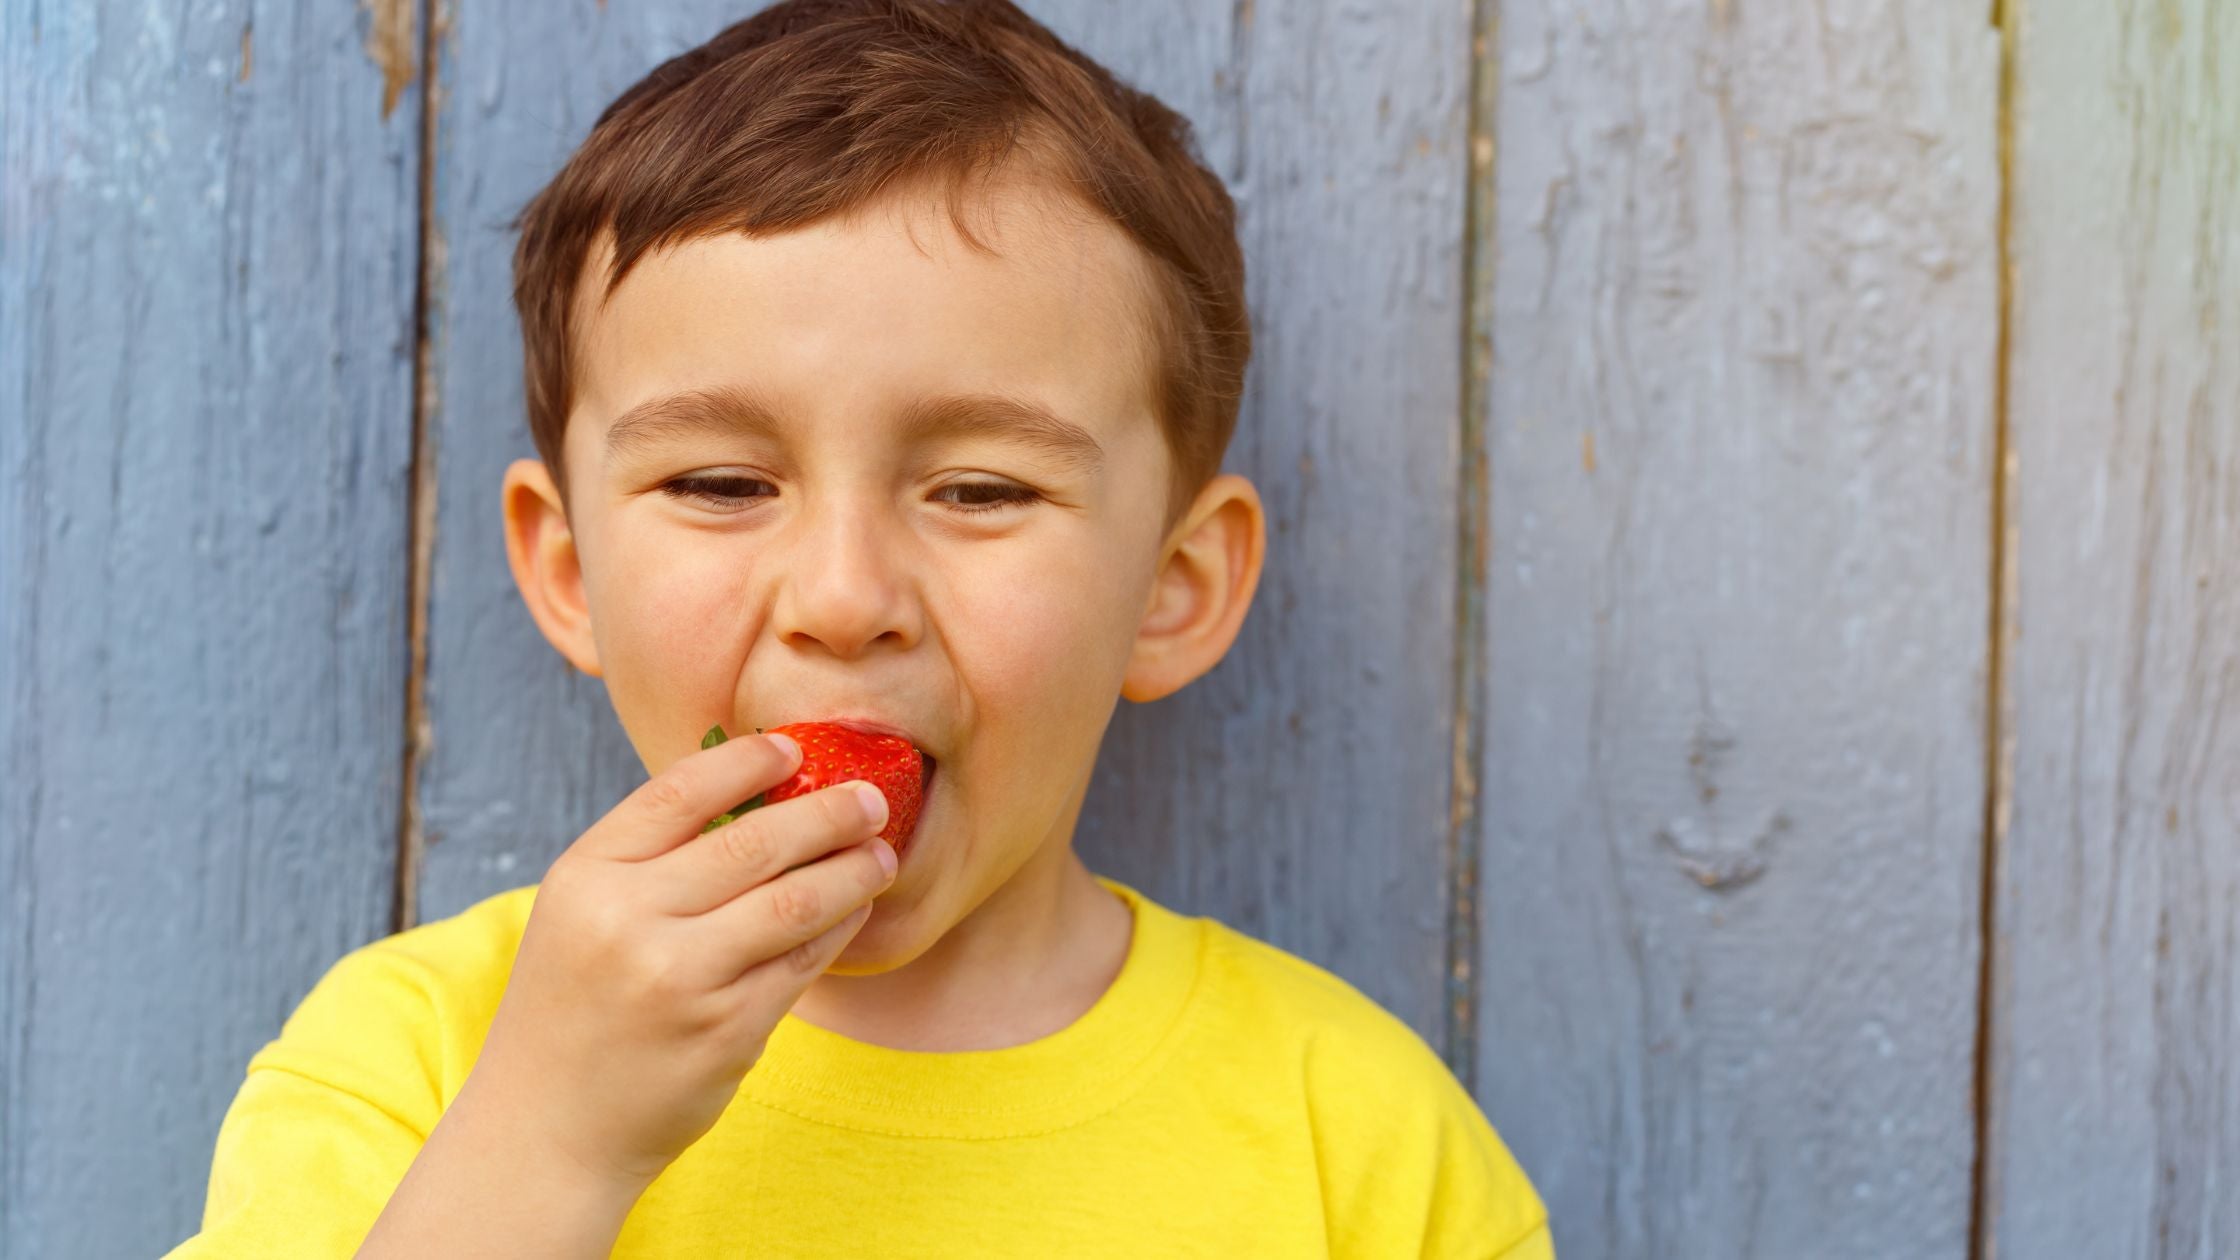 Five Hydrating Foods to Pack in Your Child’s Lunchbox If They Have Dry Skin